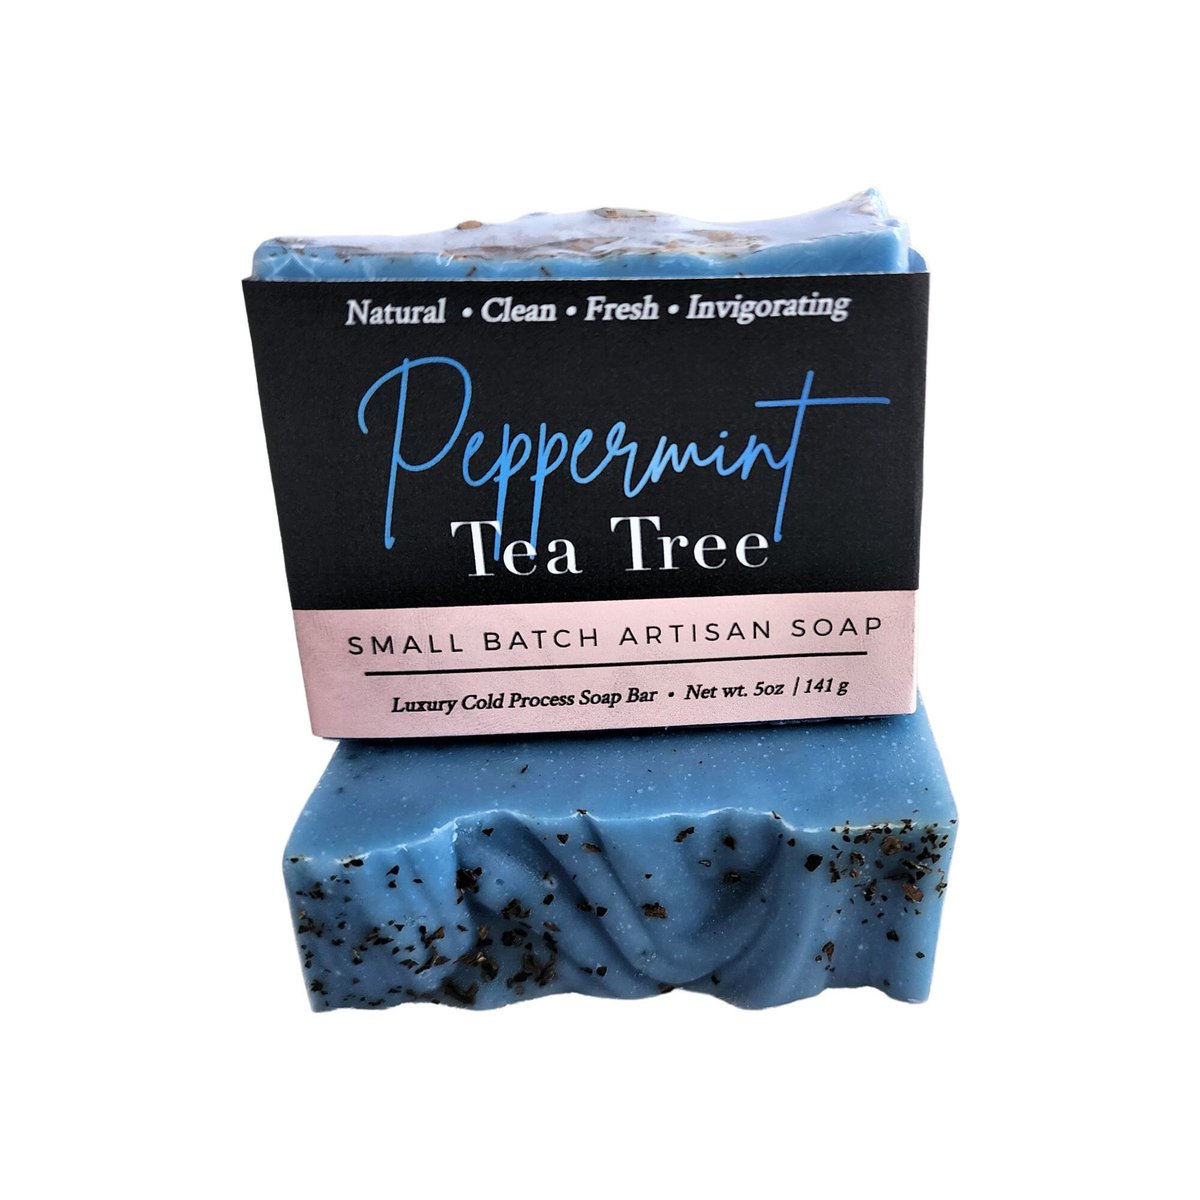 Mint Soap, Tea Tree Soap, Peppermint Soap, Organic Soap, Vegan Soap, Natural Soap, Cold Process Soap, Soap Gift, Soap for men, Blue Soap tuppu.net/a8dc1277 #soap #selfcare #Christmasgifts #gifts #DeShawnMarie #Soapgift #shopsmall #Etsy #TeaTreeSoap